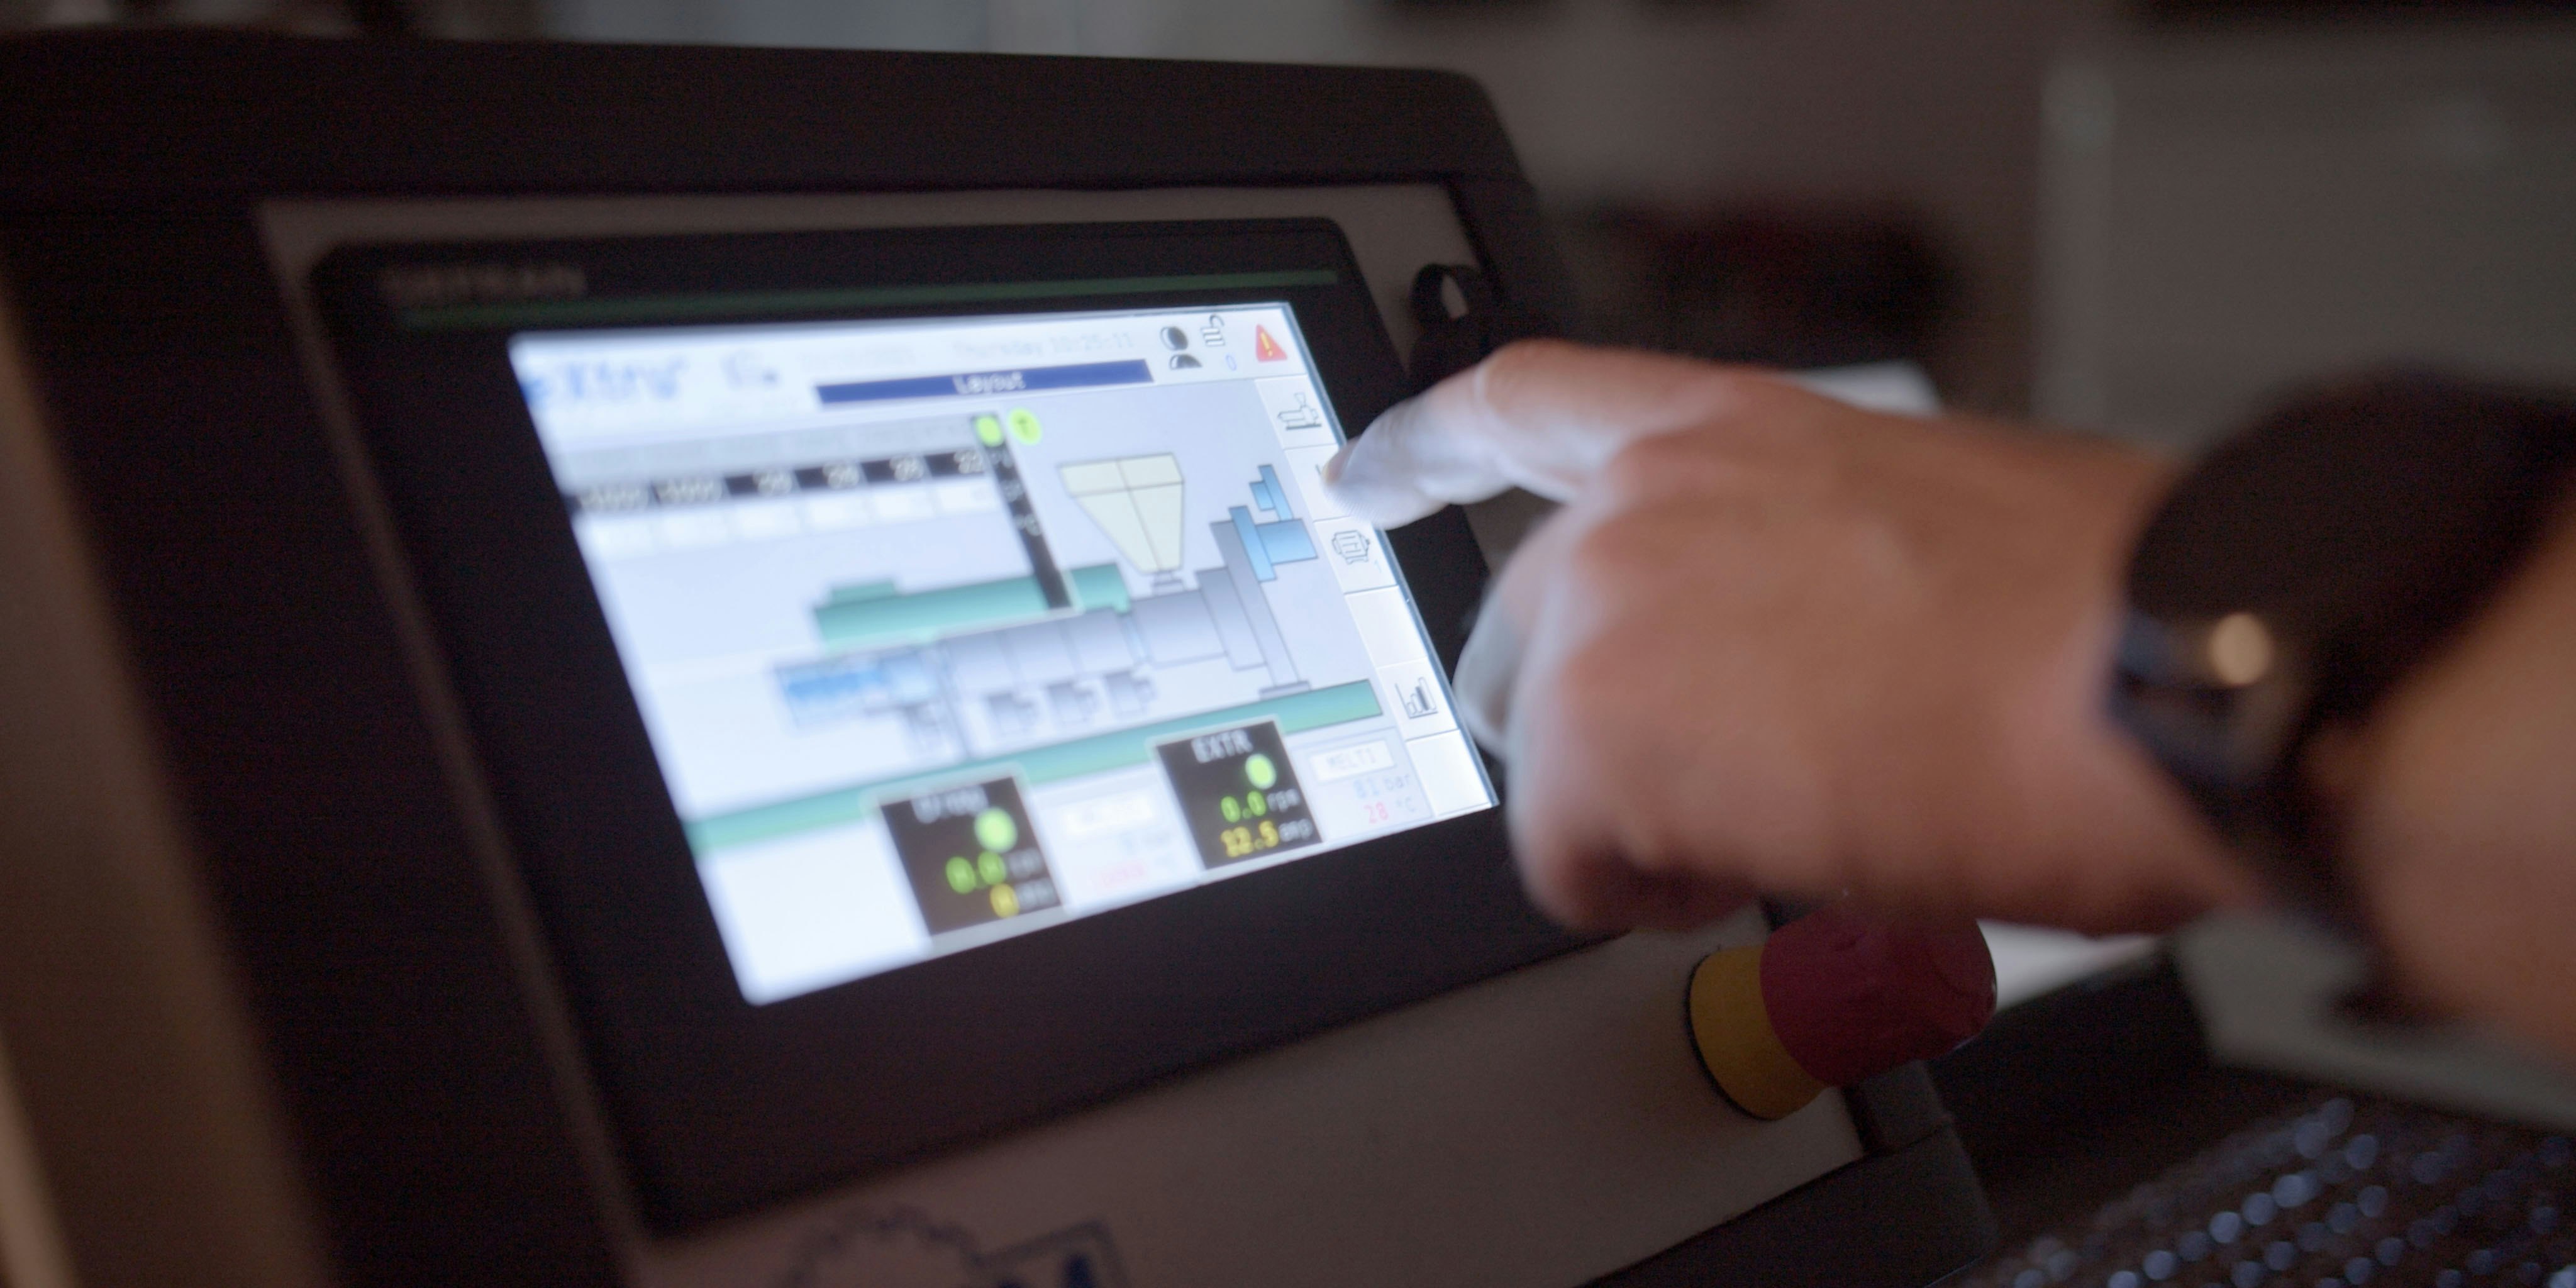 Hand pointing on a monitor showing a production system